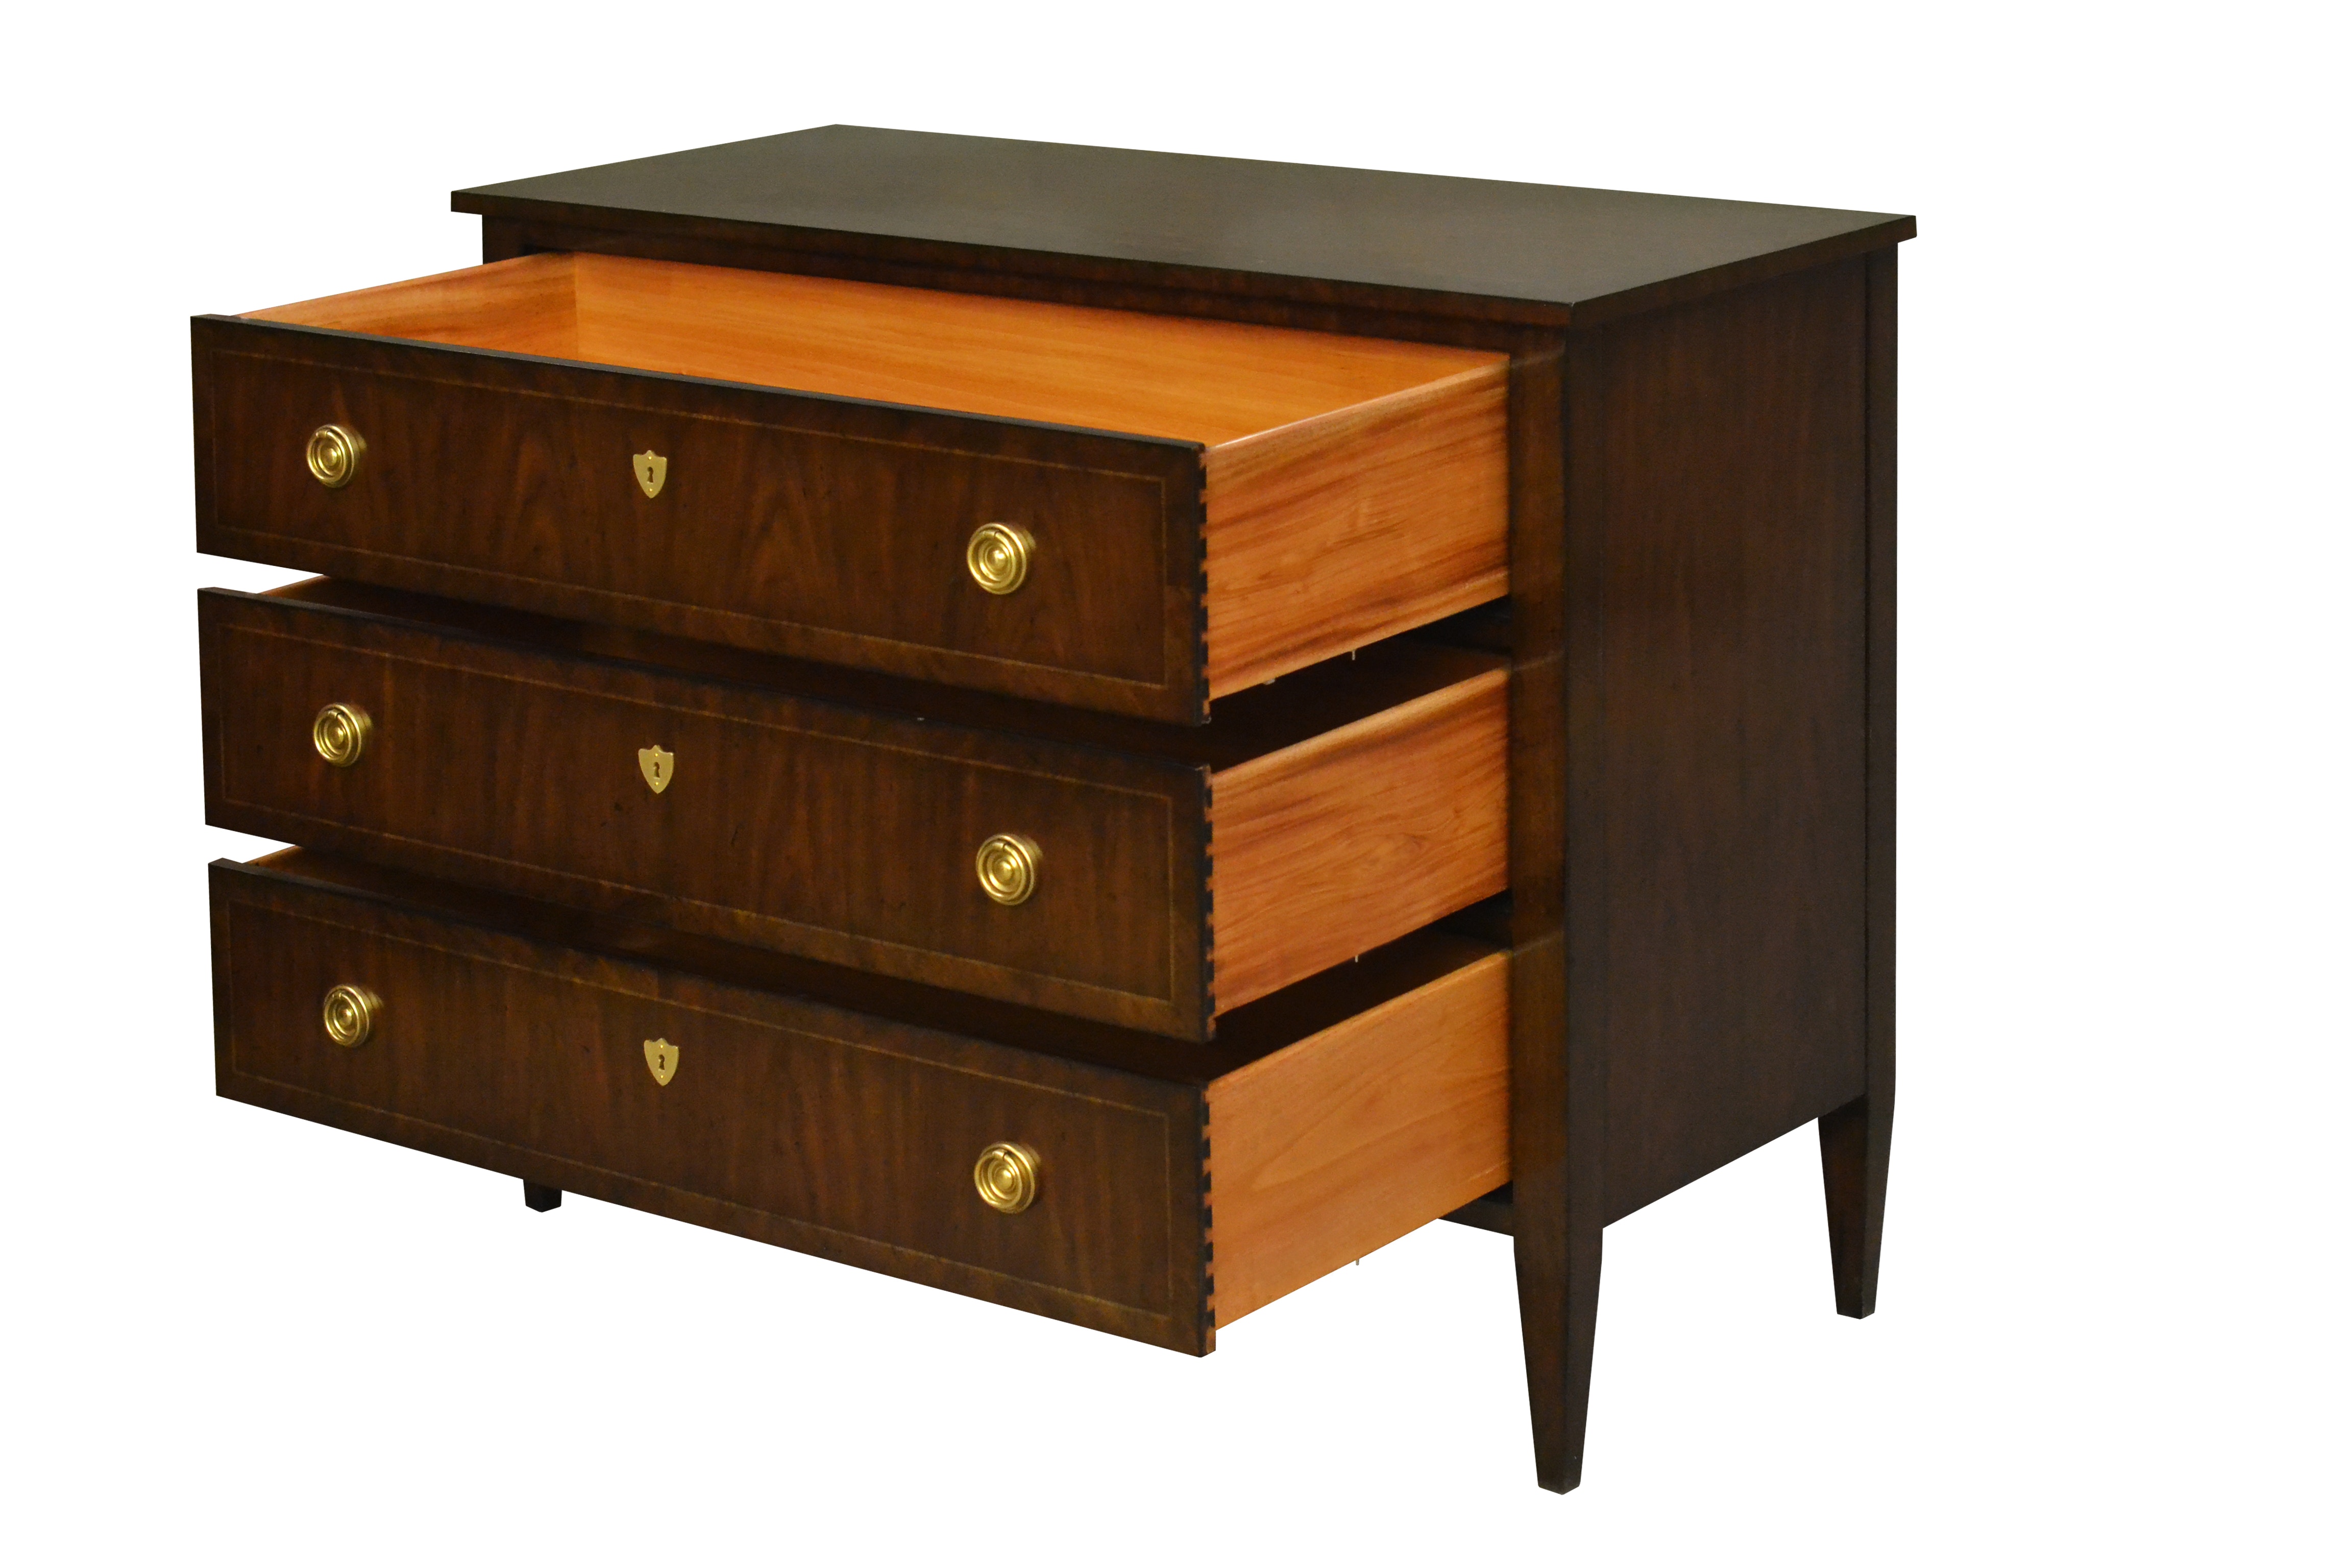 Maitland-Smith Bedroom Low Chest Of Drawers HM1001 - Howard Lorton 